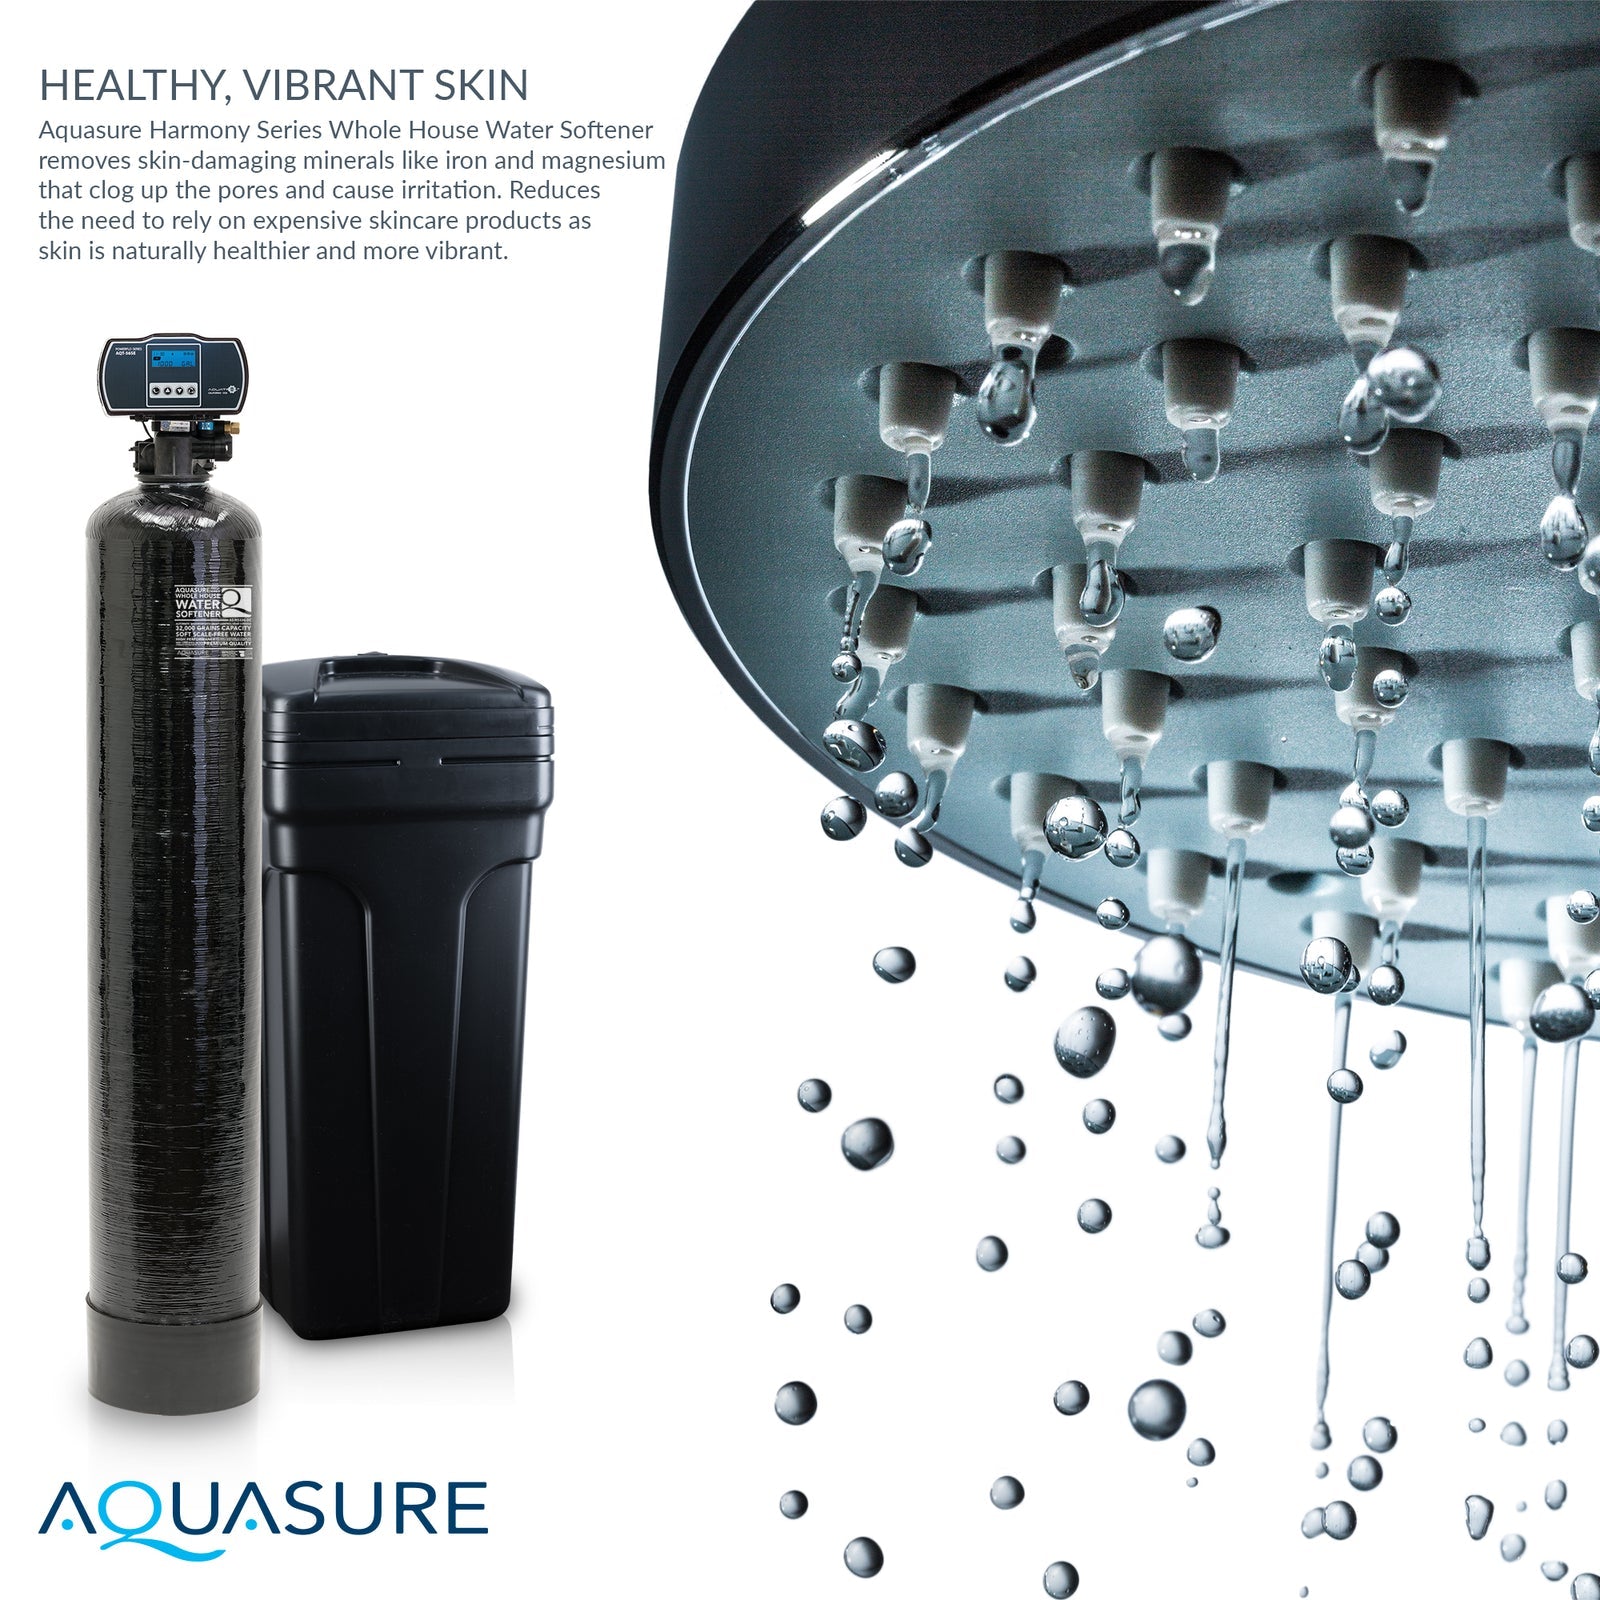 Aquasure, Aquasure AS-HS32FM Harmony Series 32,000 Grain Water Softener with Fine Mesh Resin for Iron Removal New